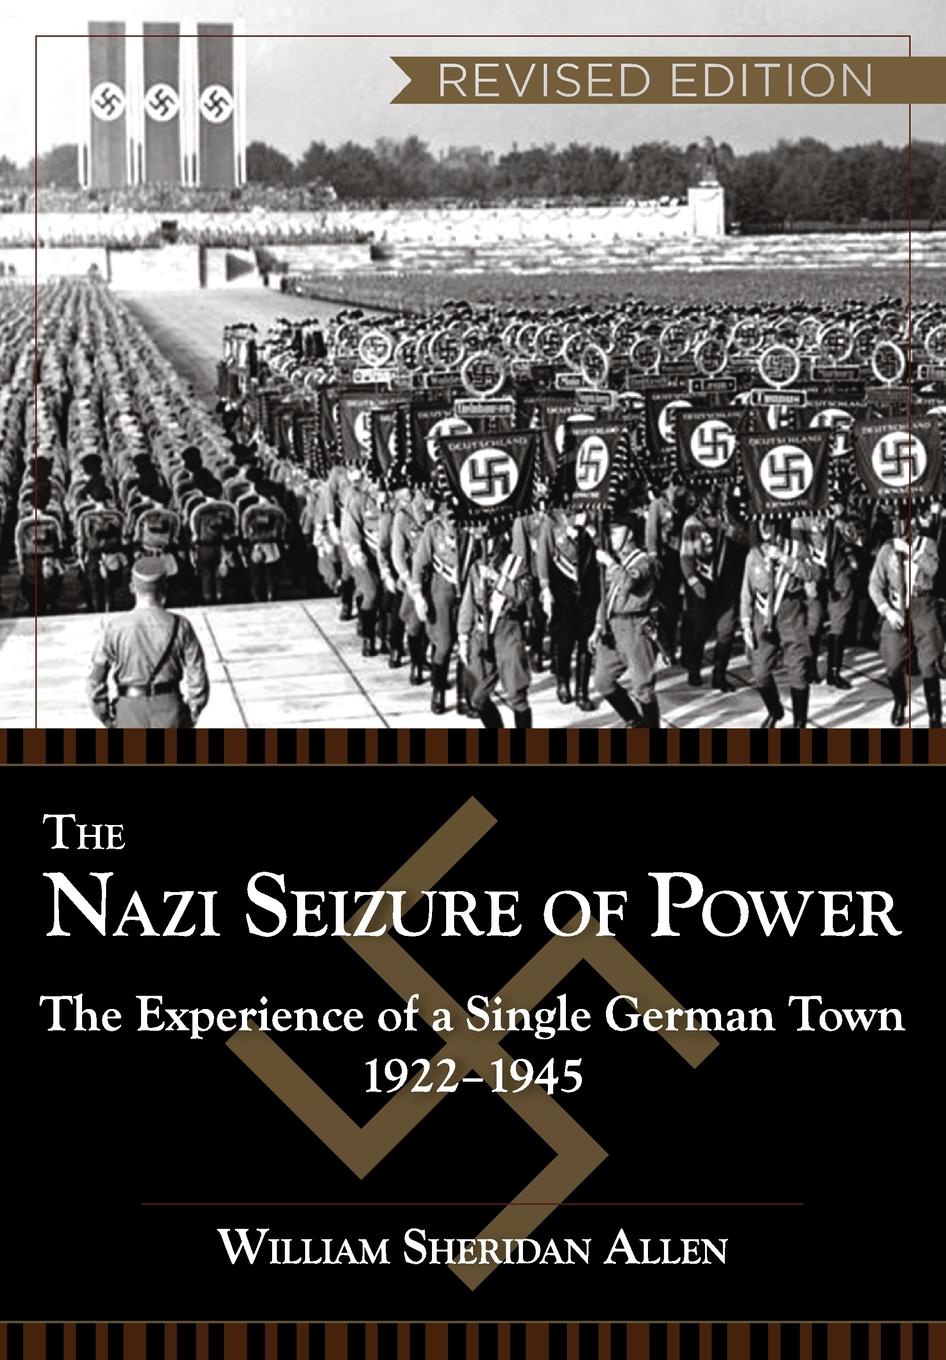 The Nazi Seizure of Power. The Experience of a Single German Town, 1922-1945, Revised Edition